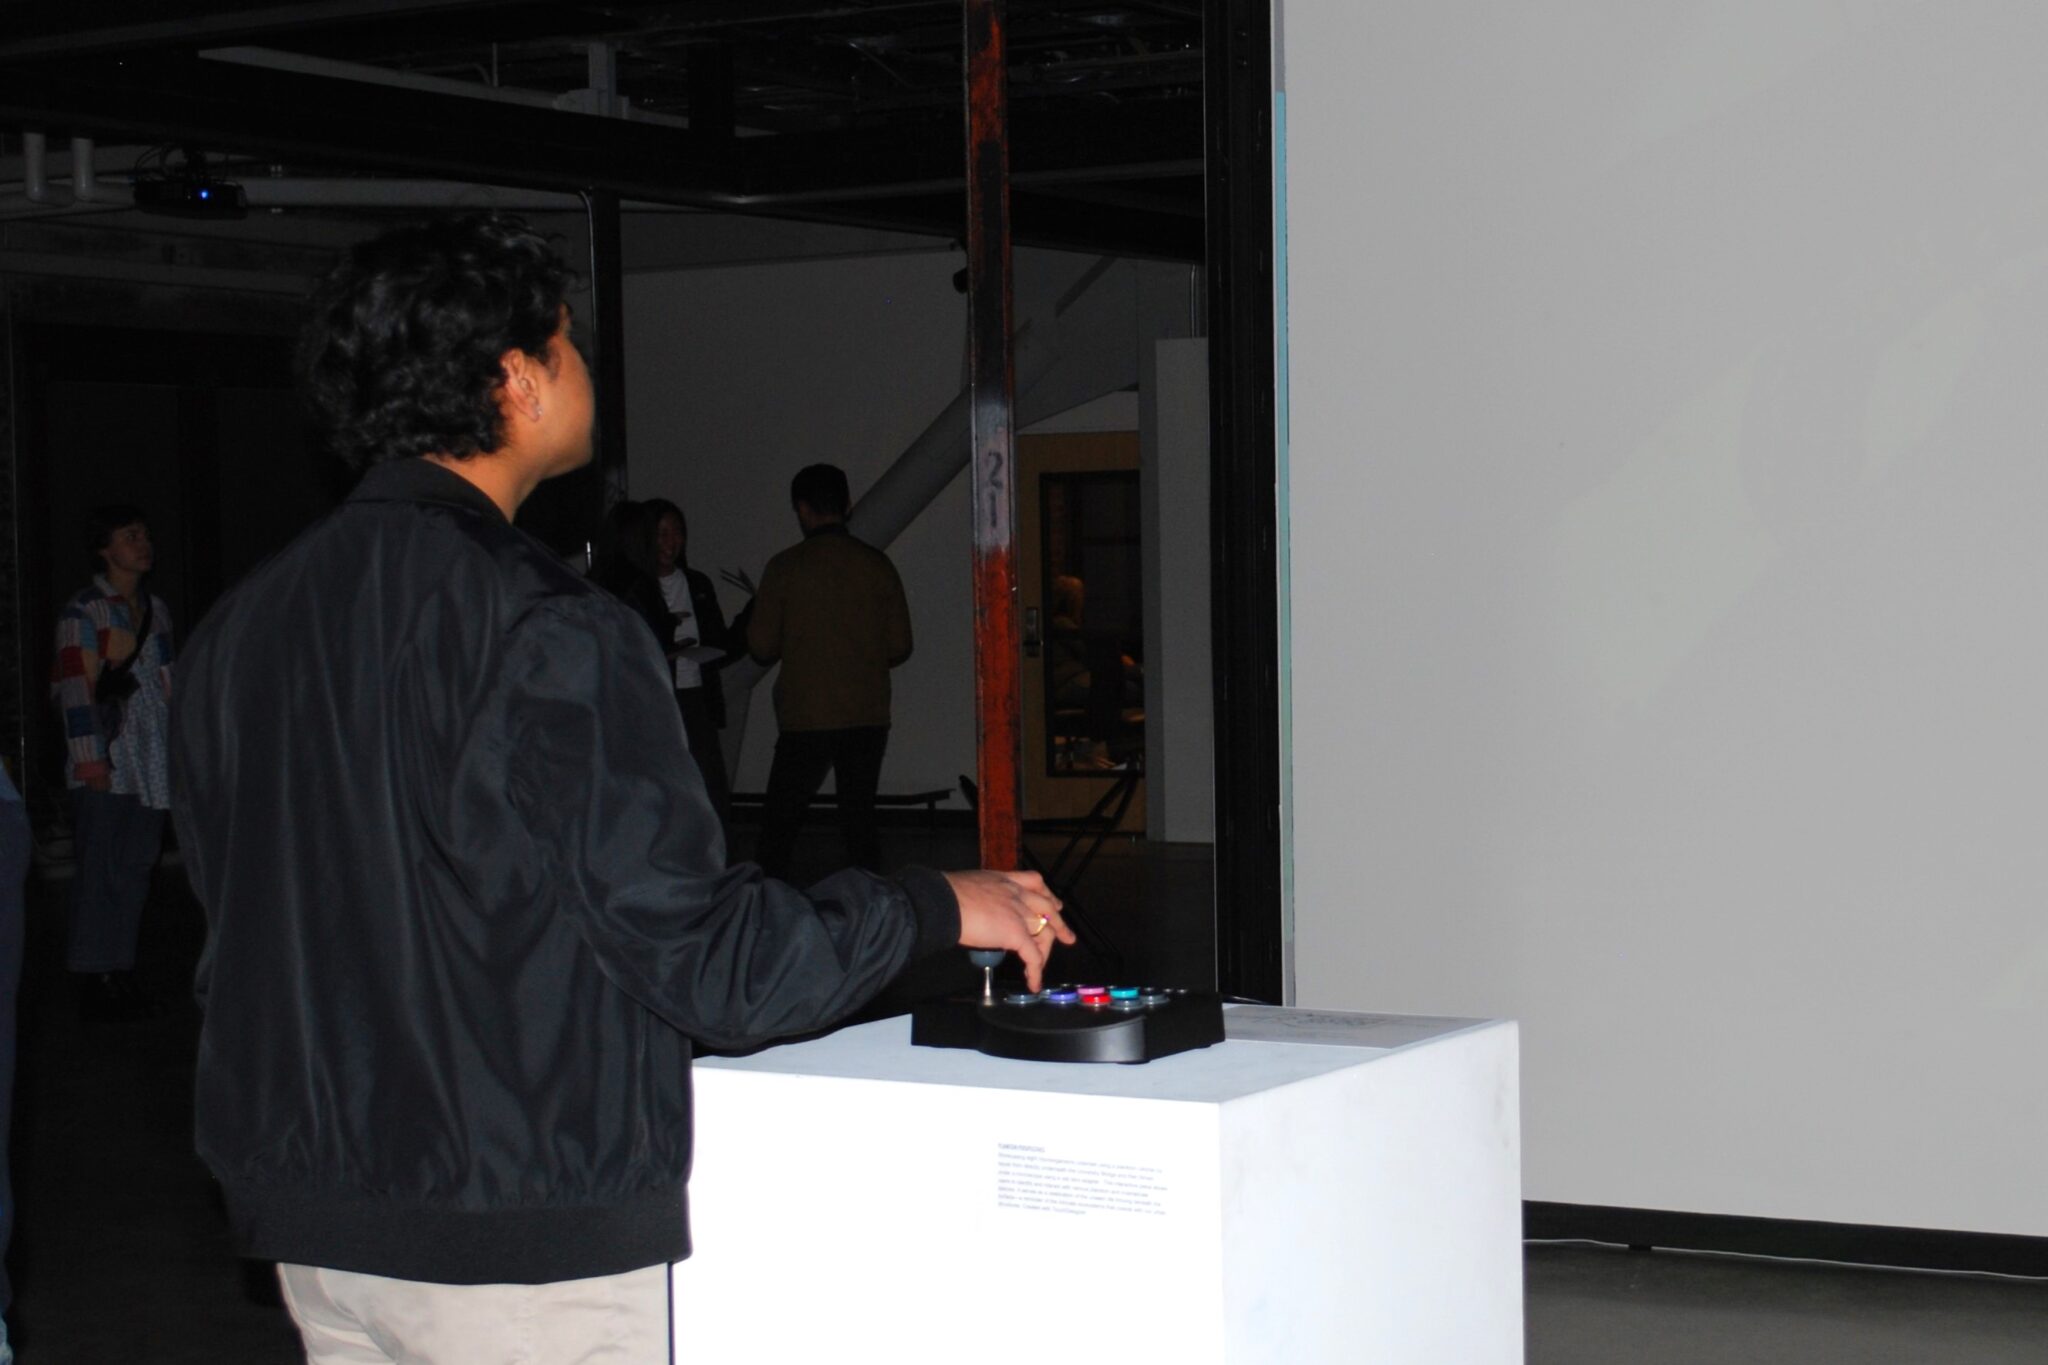 person using a joystick on a pedestal to control projected video